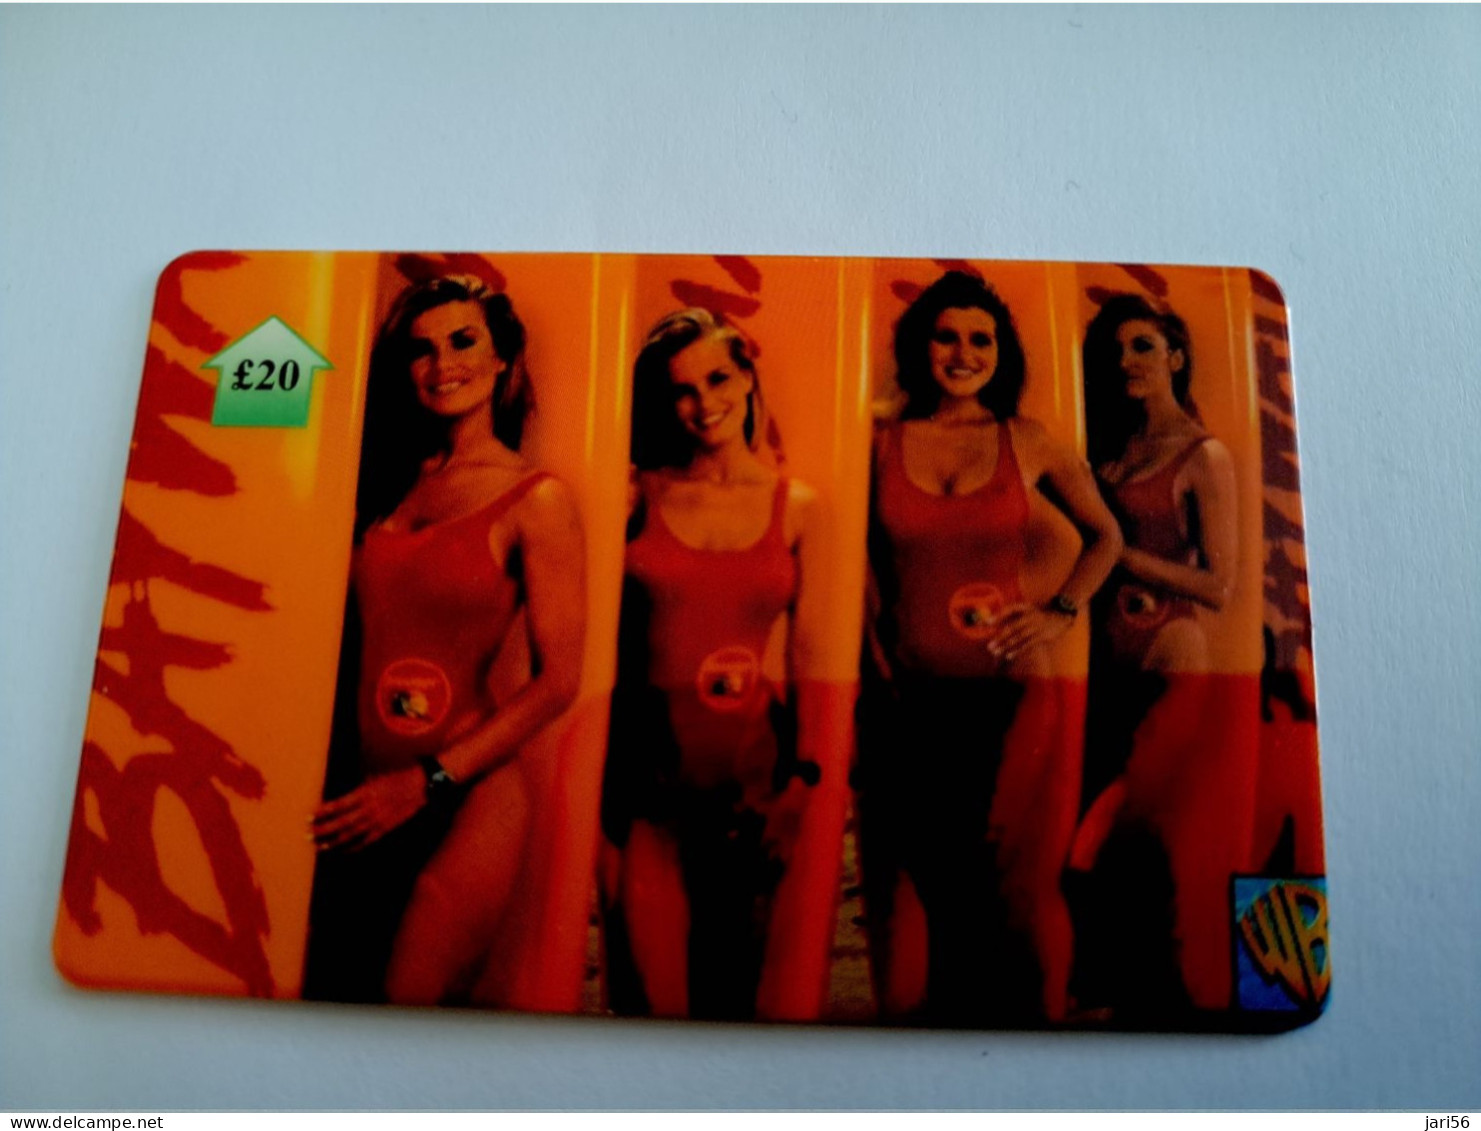 GREAT BRITAIN / 20 POUND /MAGSTRIPE  / BAYWATCH PHONECARD/ LIMITED EDITION/ ONLY 500 EX     **15684** - Collections